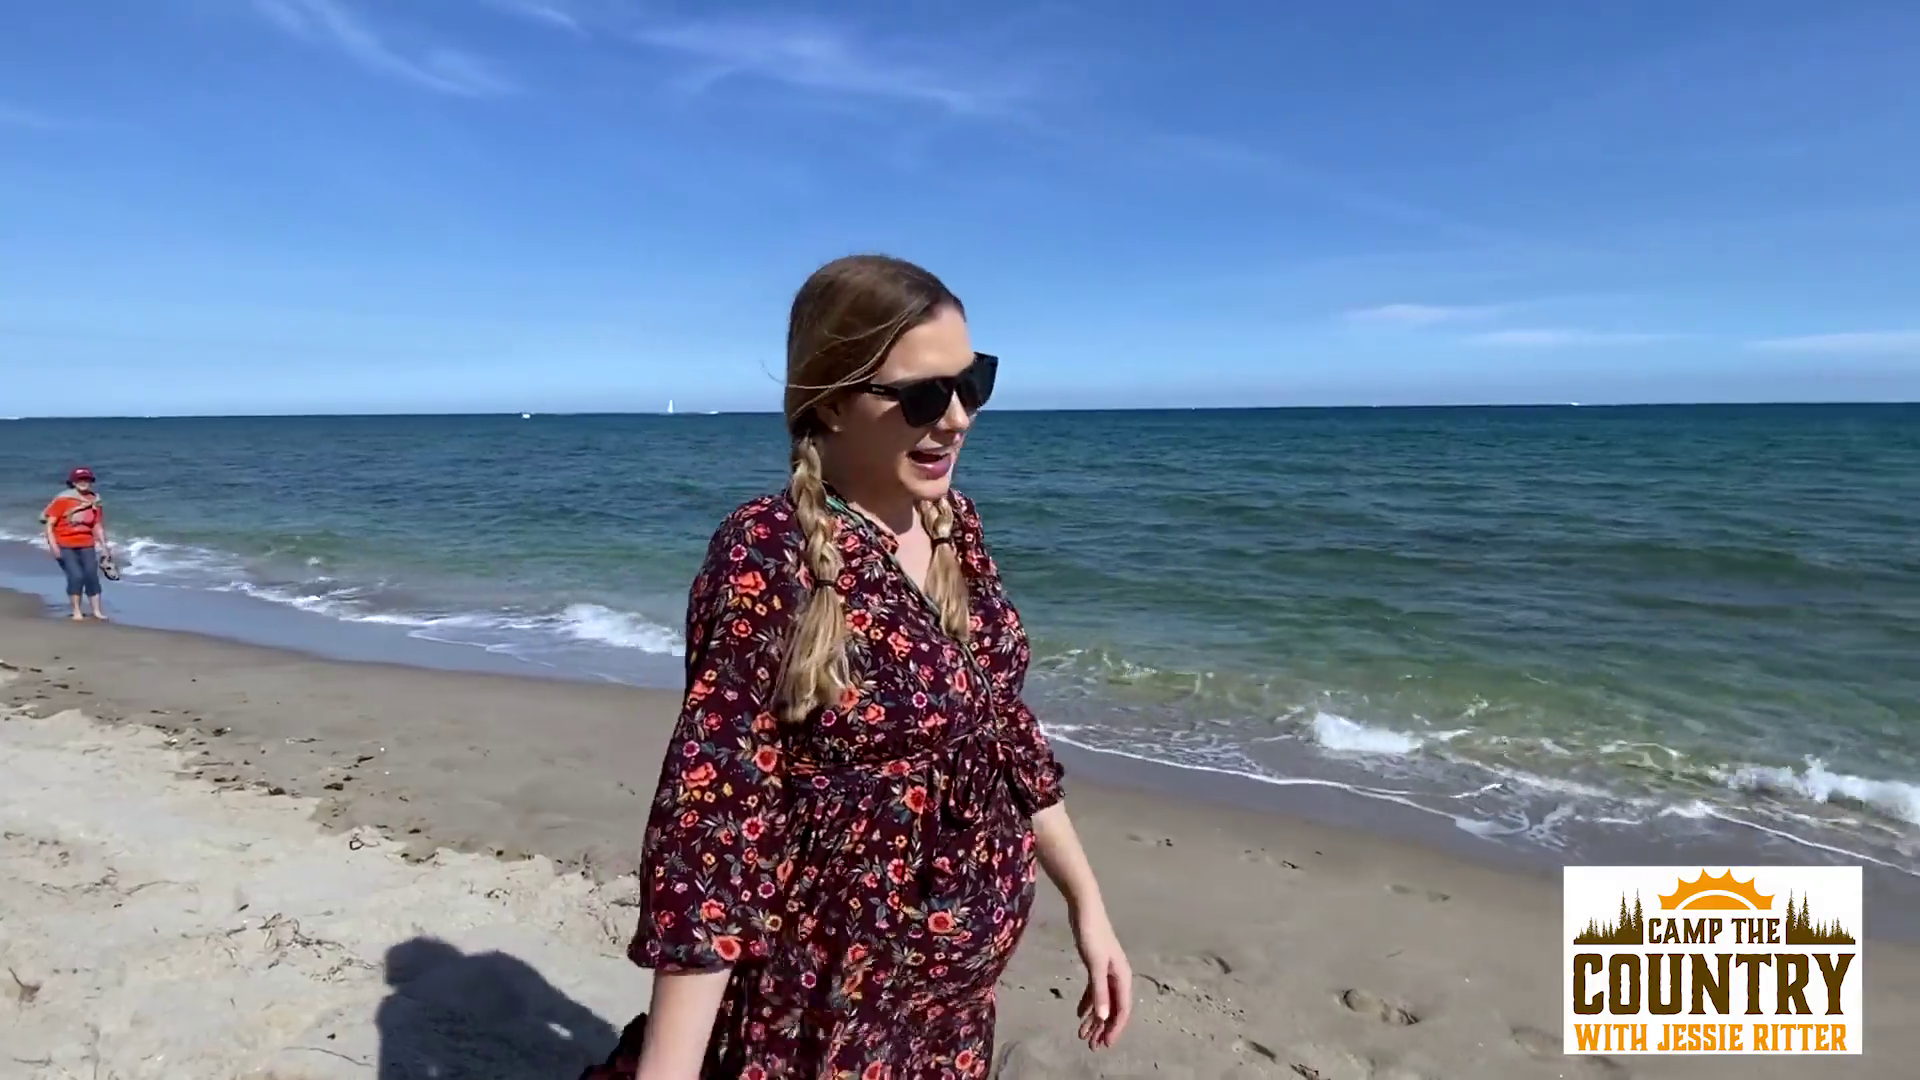 Camp the Country with Jessie Ritter: "Exploring Miami"